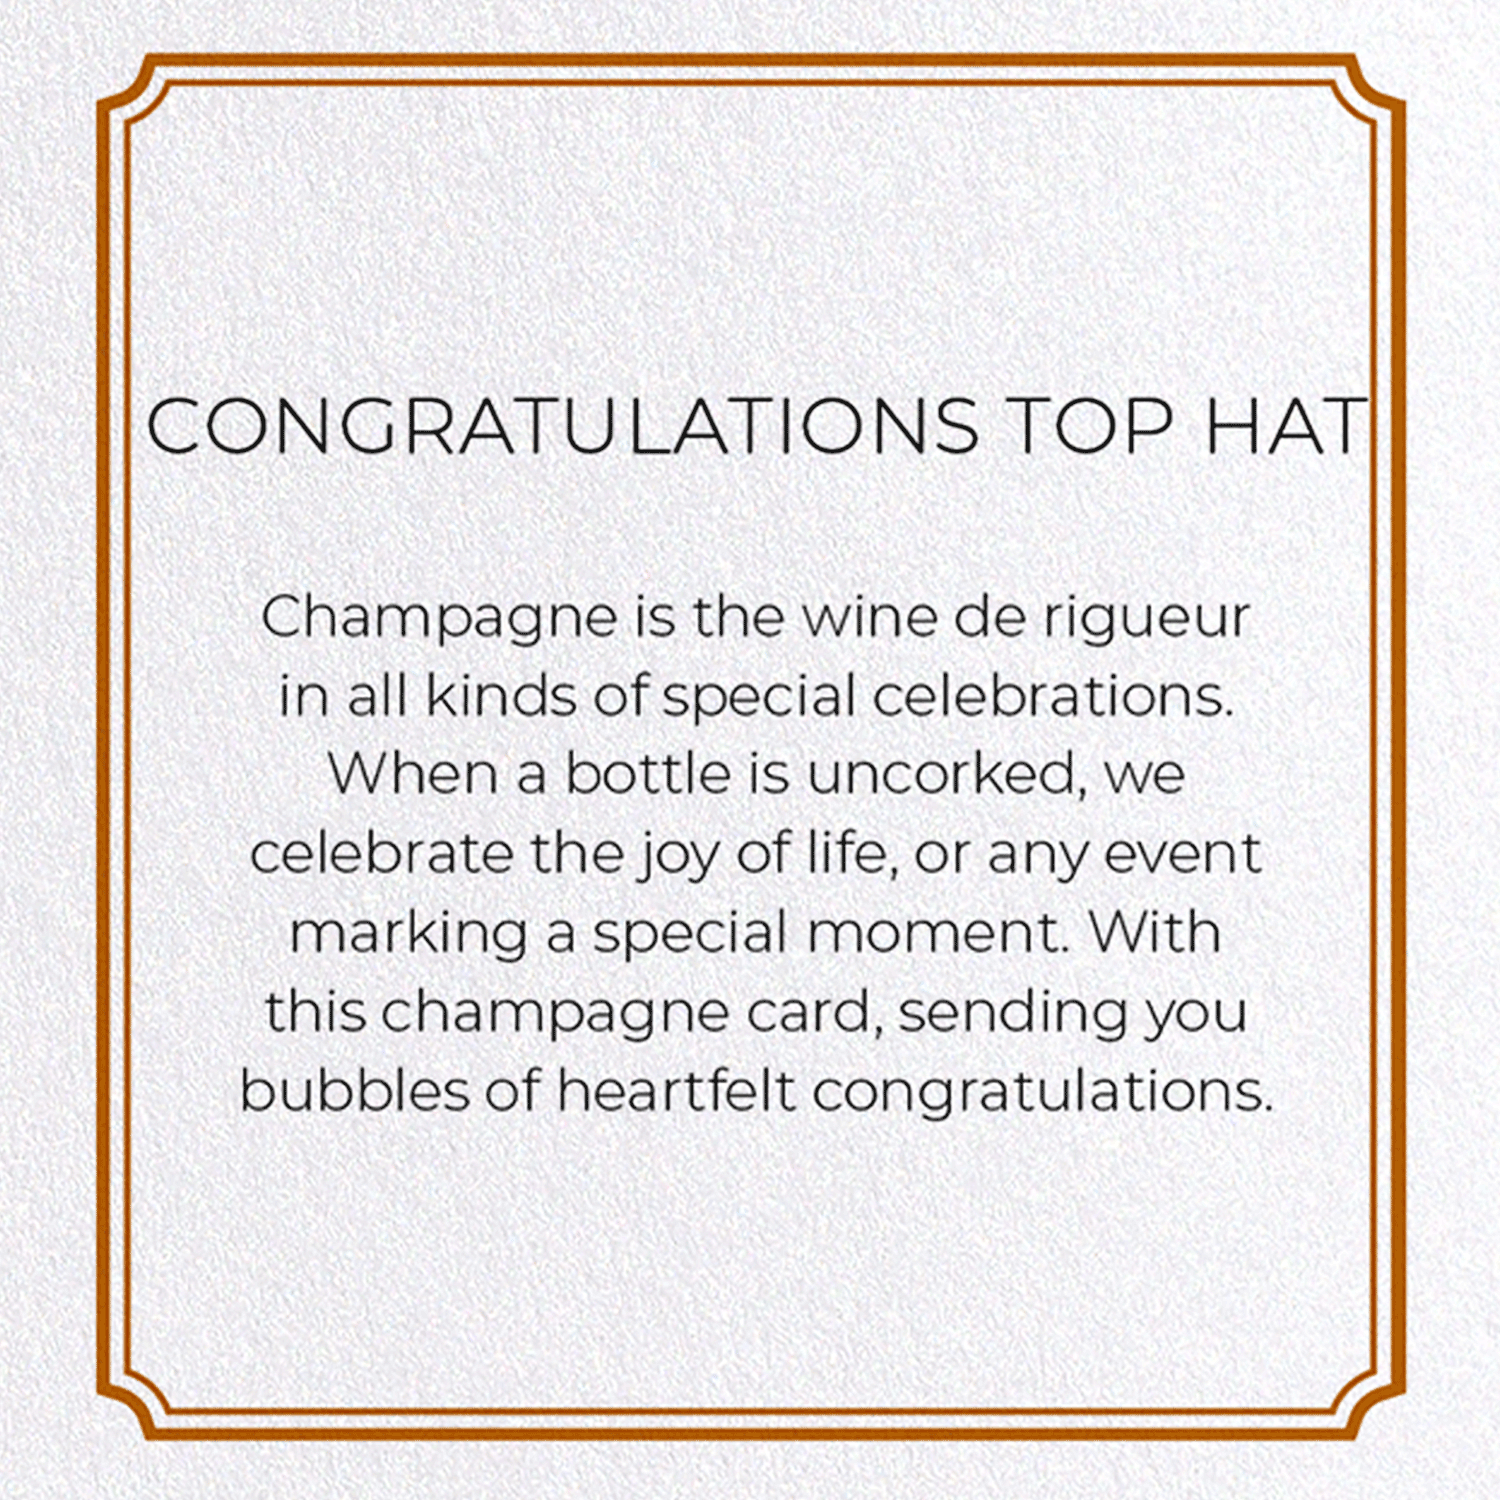 CONGRATULATIONS TOP HAT: Vintage Greeting Card